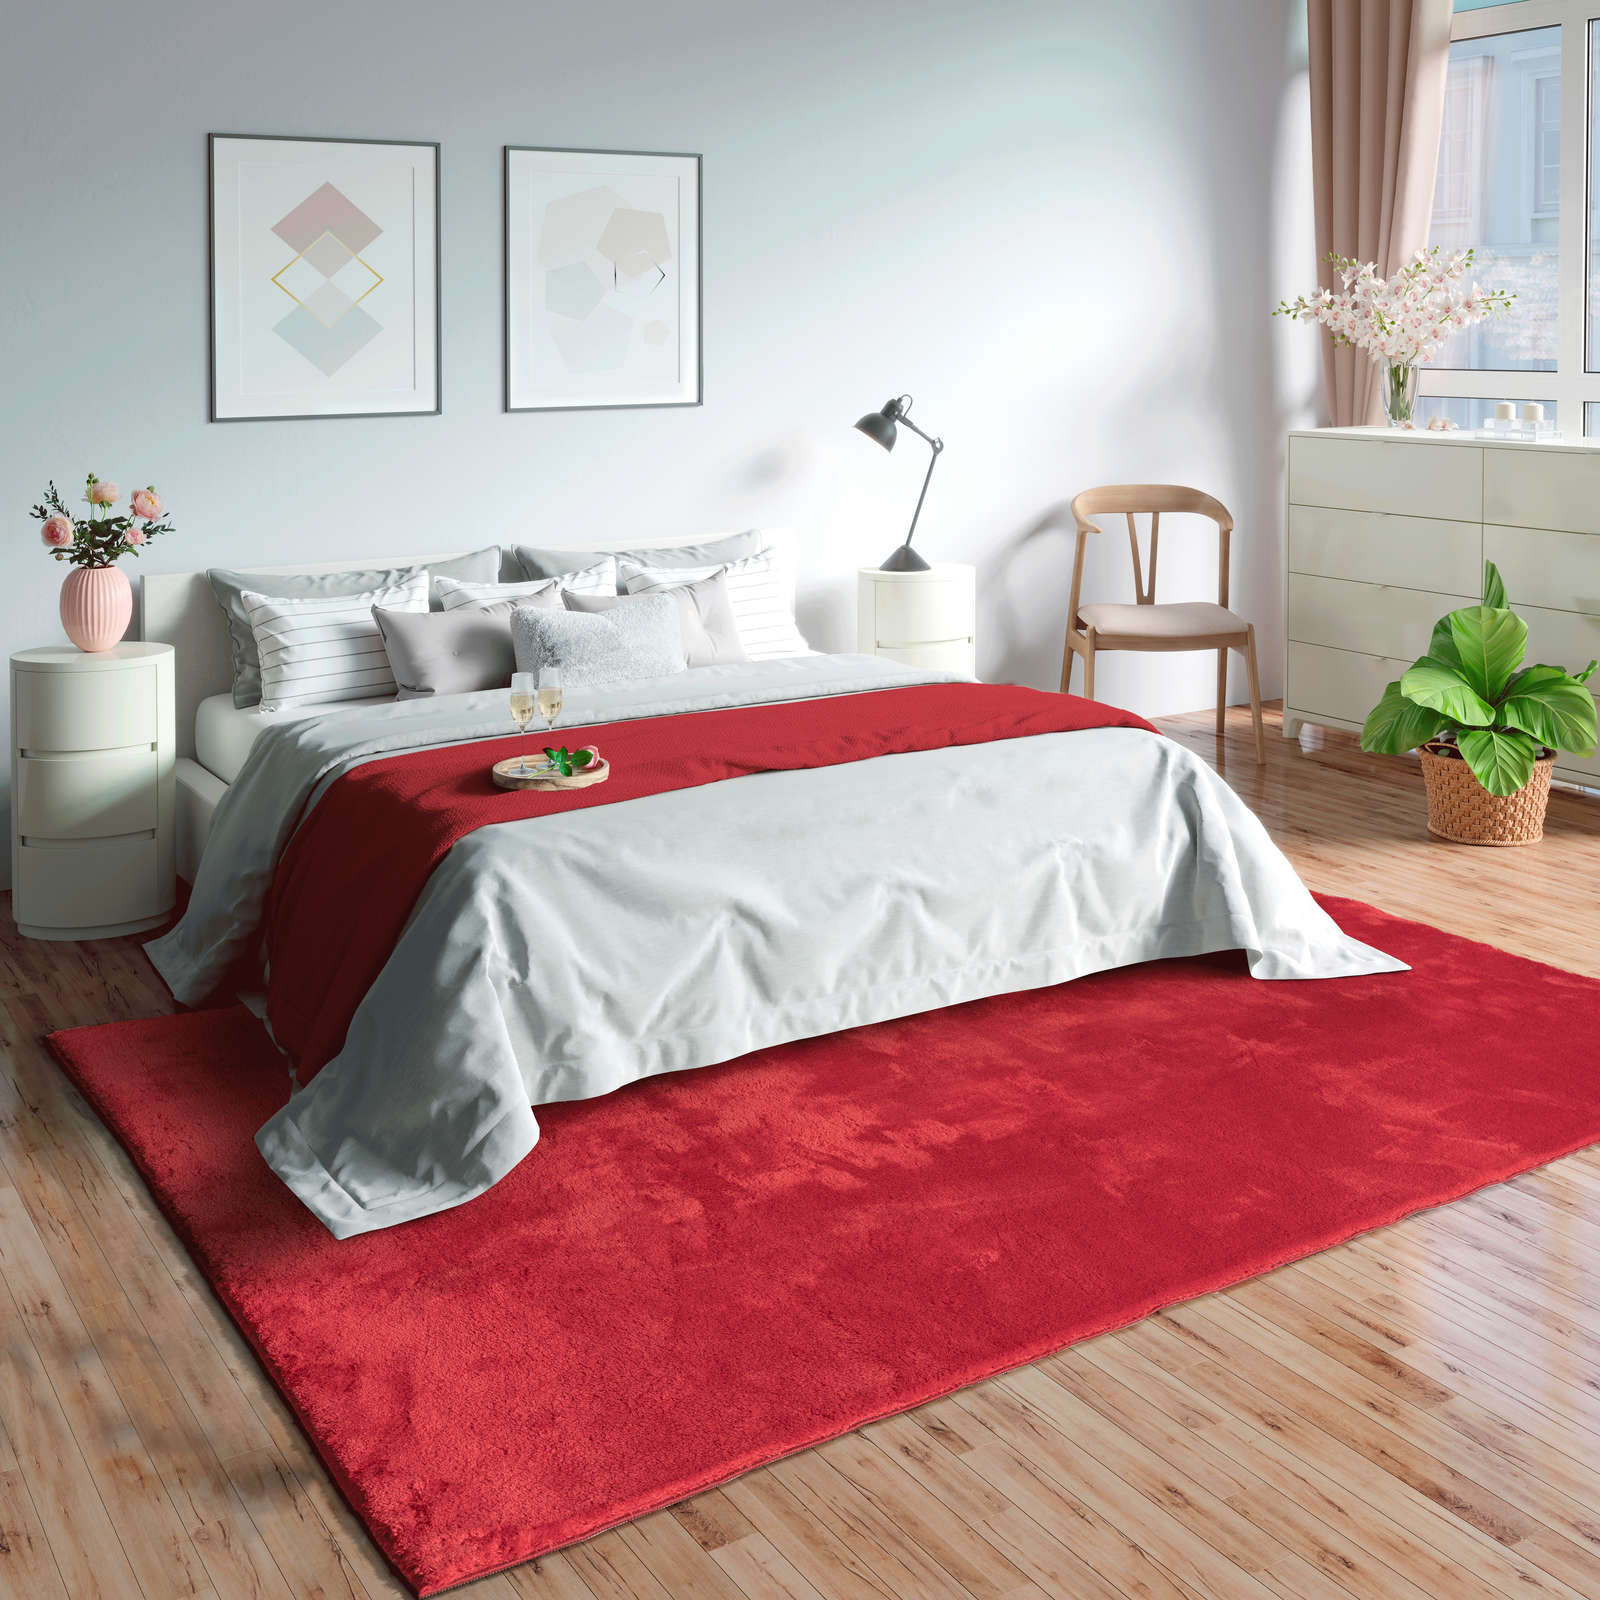             Extra soft high pile carpet in red - 240 x 200 cm
        